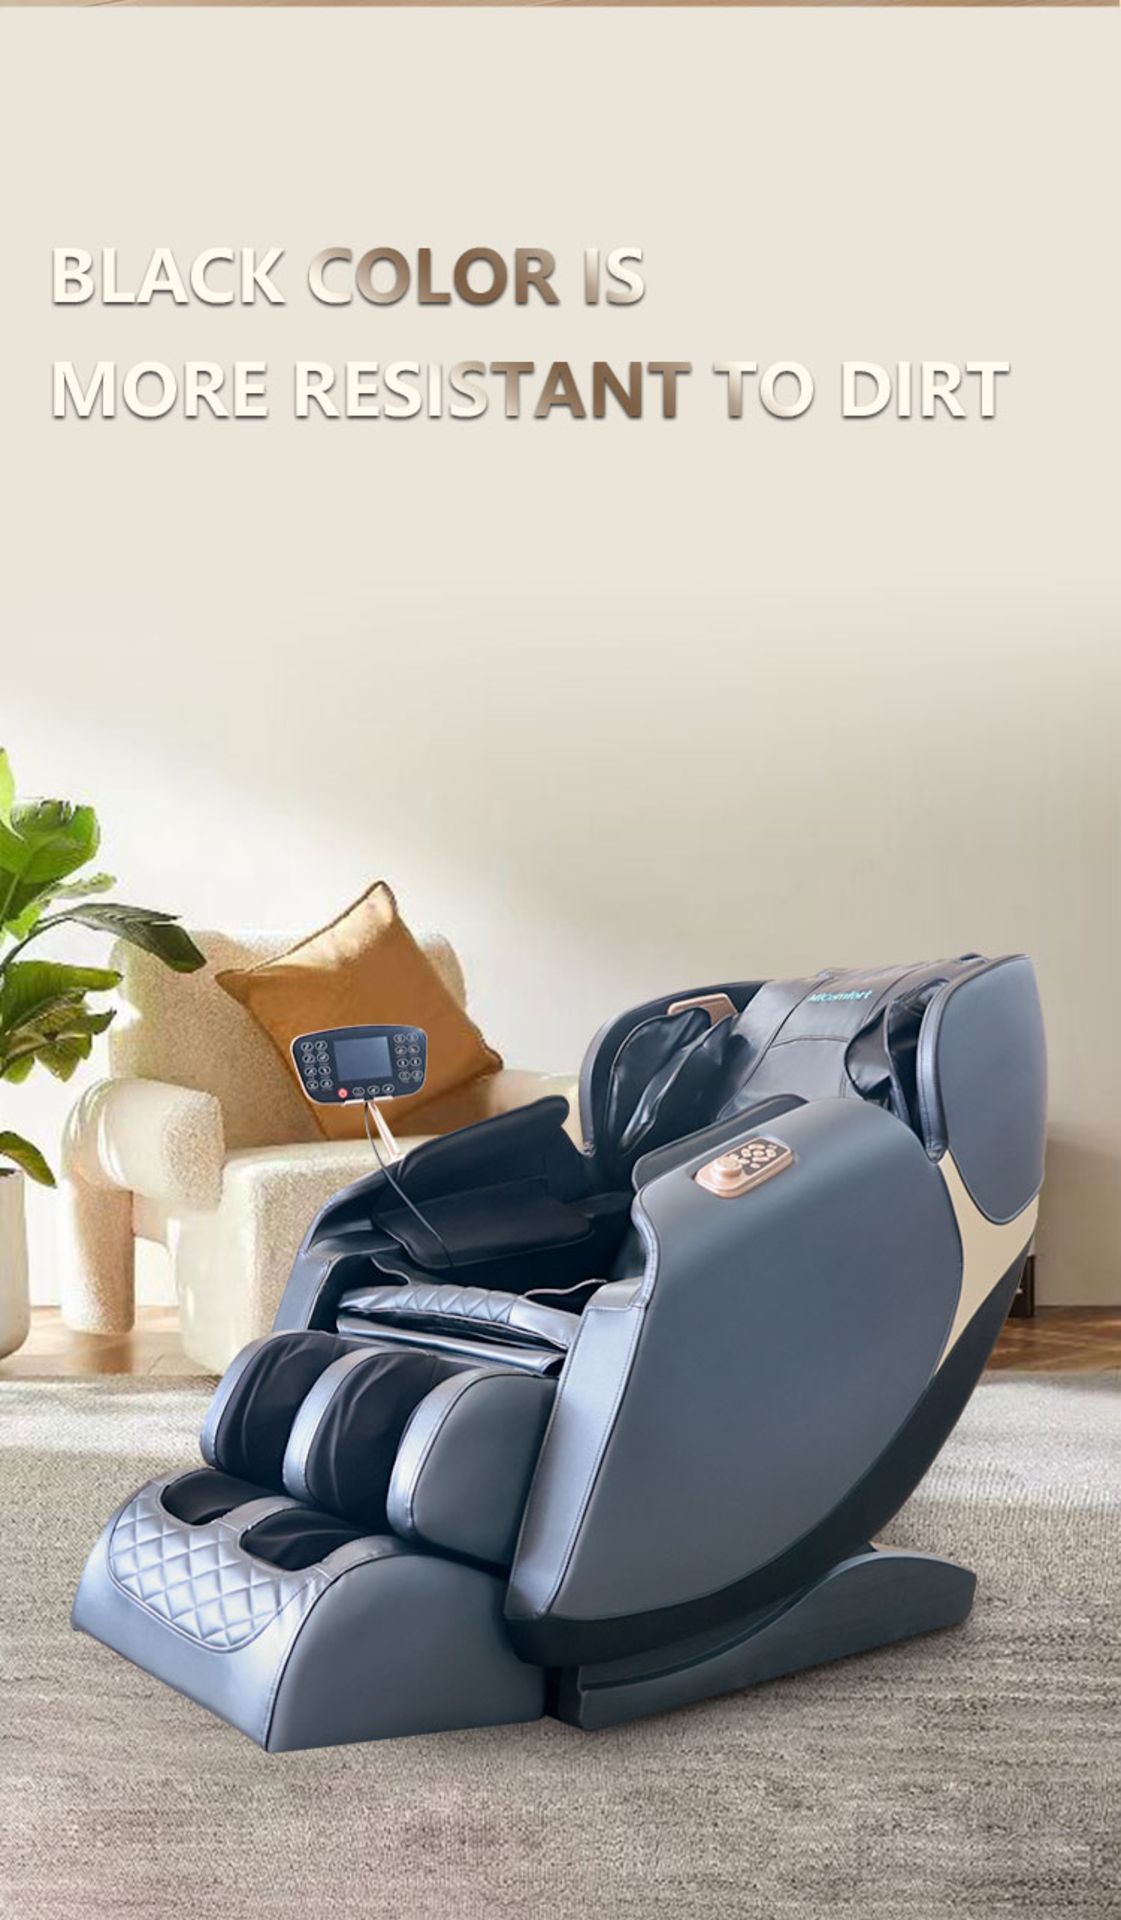 Brand New in Box Orchid Blue/Black MiComfort Full Body Massage Chair RRP £2199 *NO VAT* - Image 10 of 14